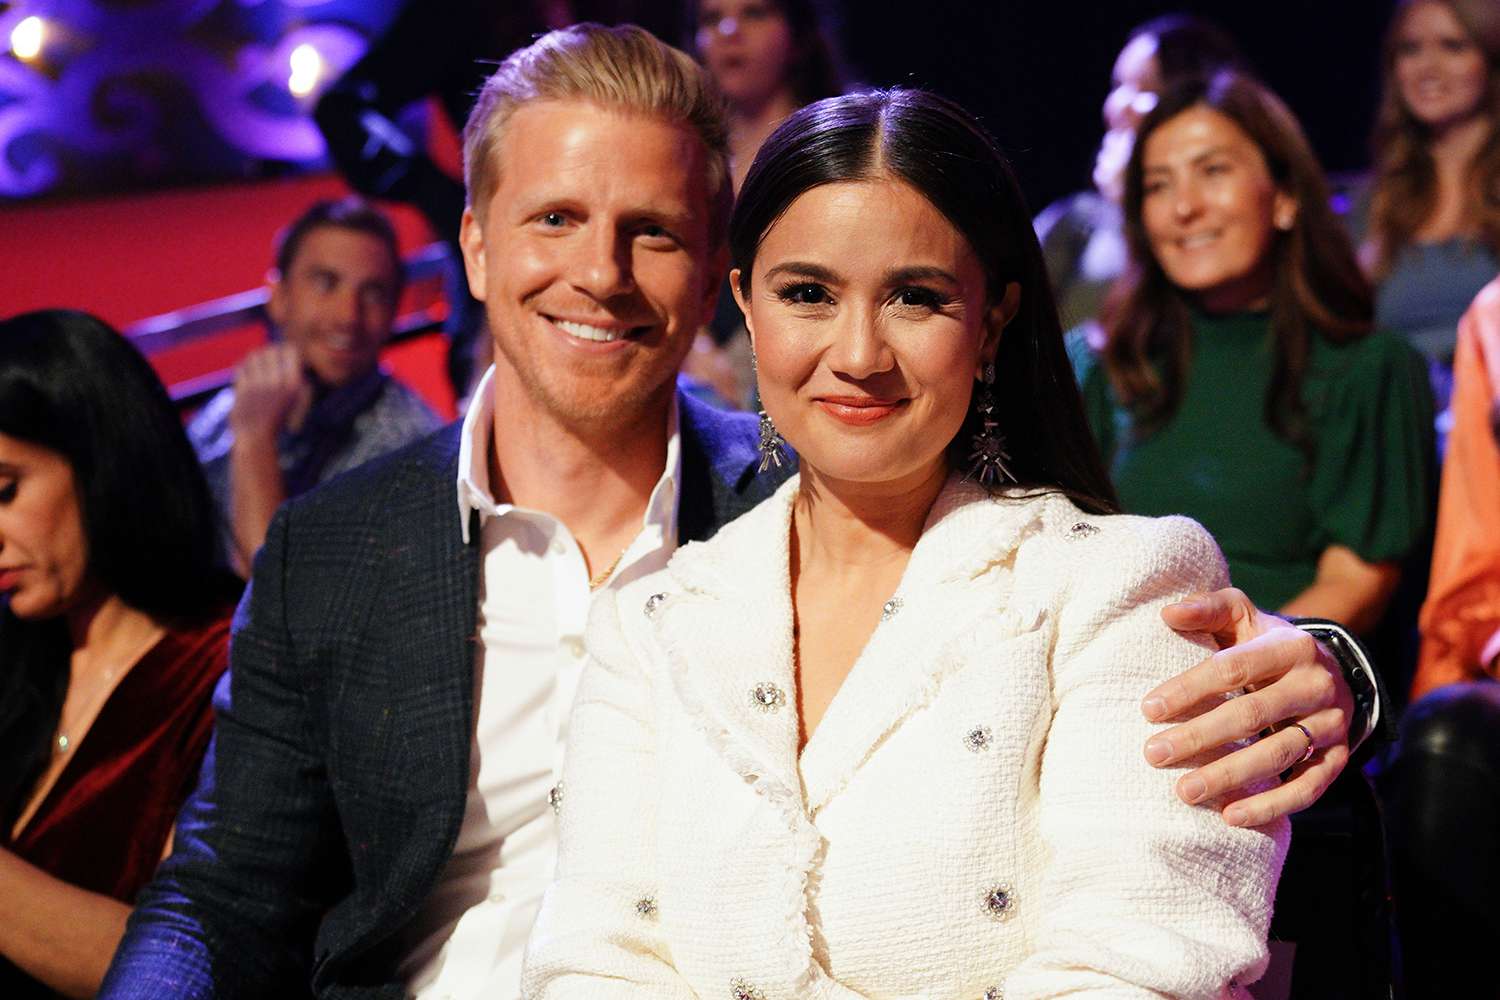 'Bachelor' Alum Sean Lowe Reveals Secret to 10-Year Marriage to Wife Catherine: 'It's Just About Committing'